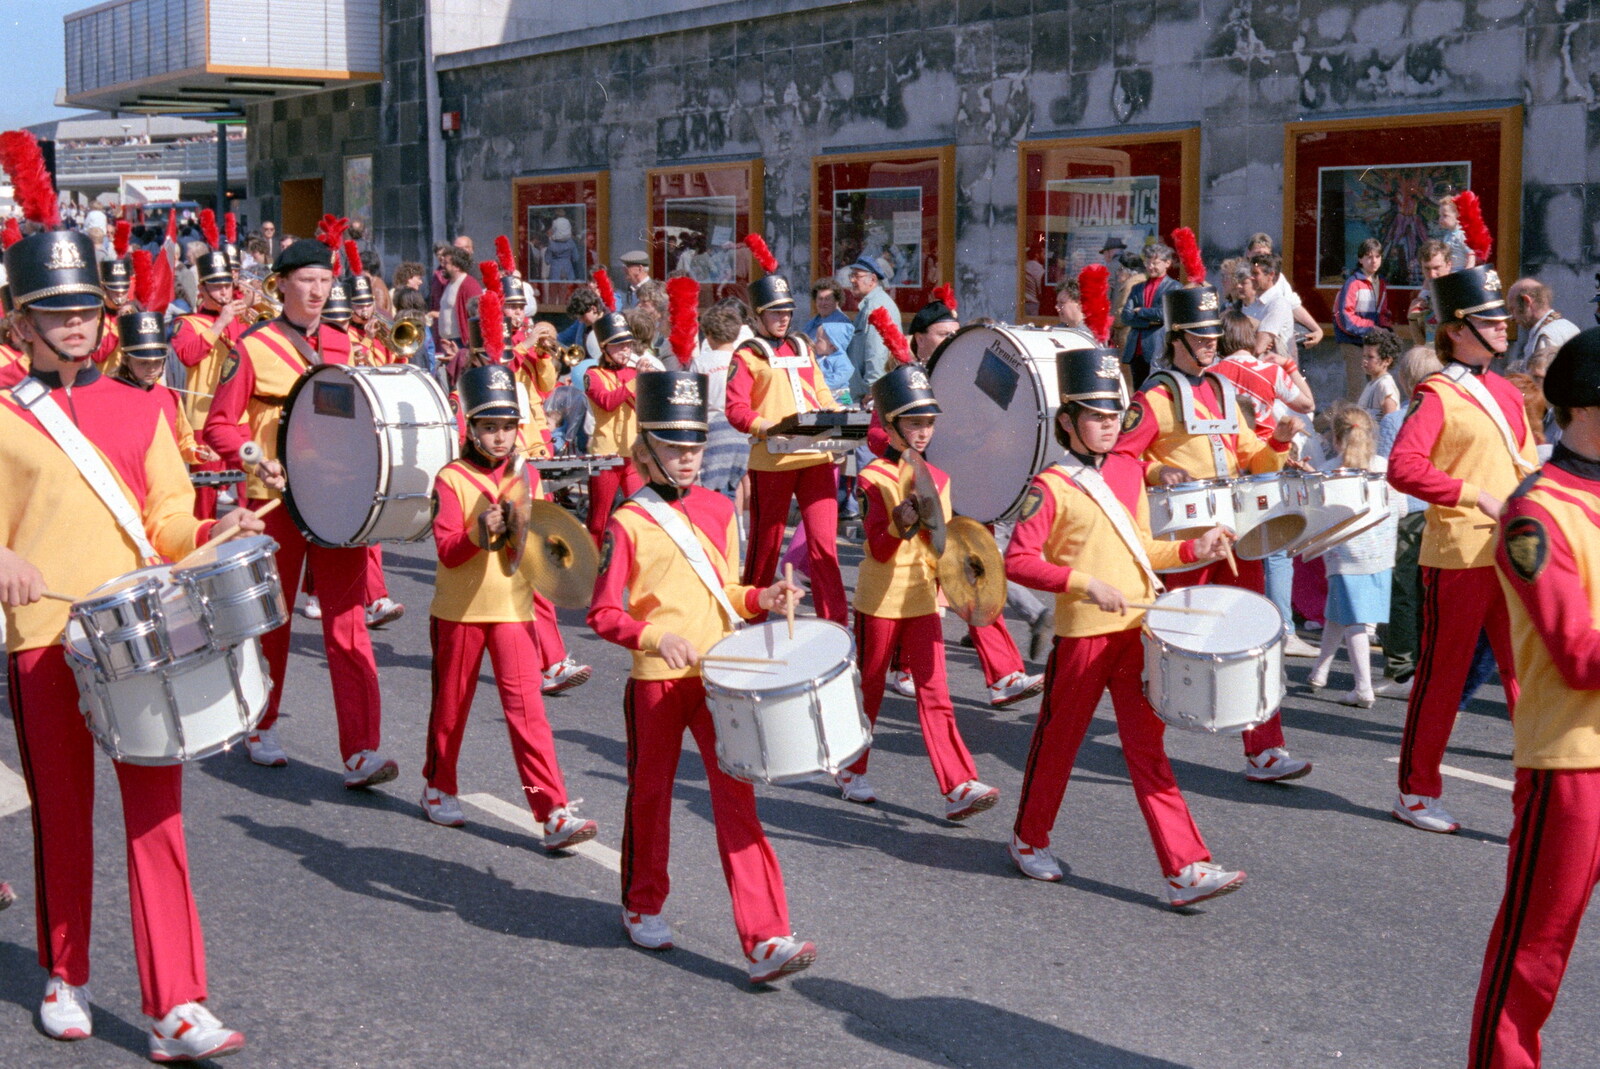 A marching band from Uni: The Lord Mayor's Procession, Plymouth, Devon - 21st May 1986